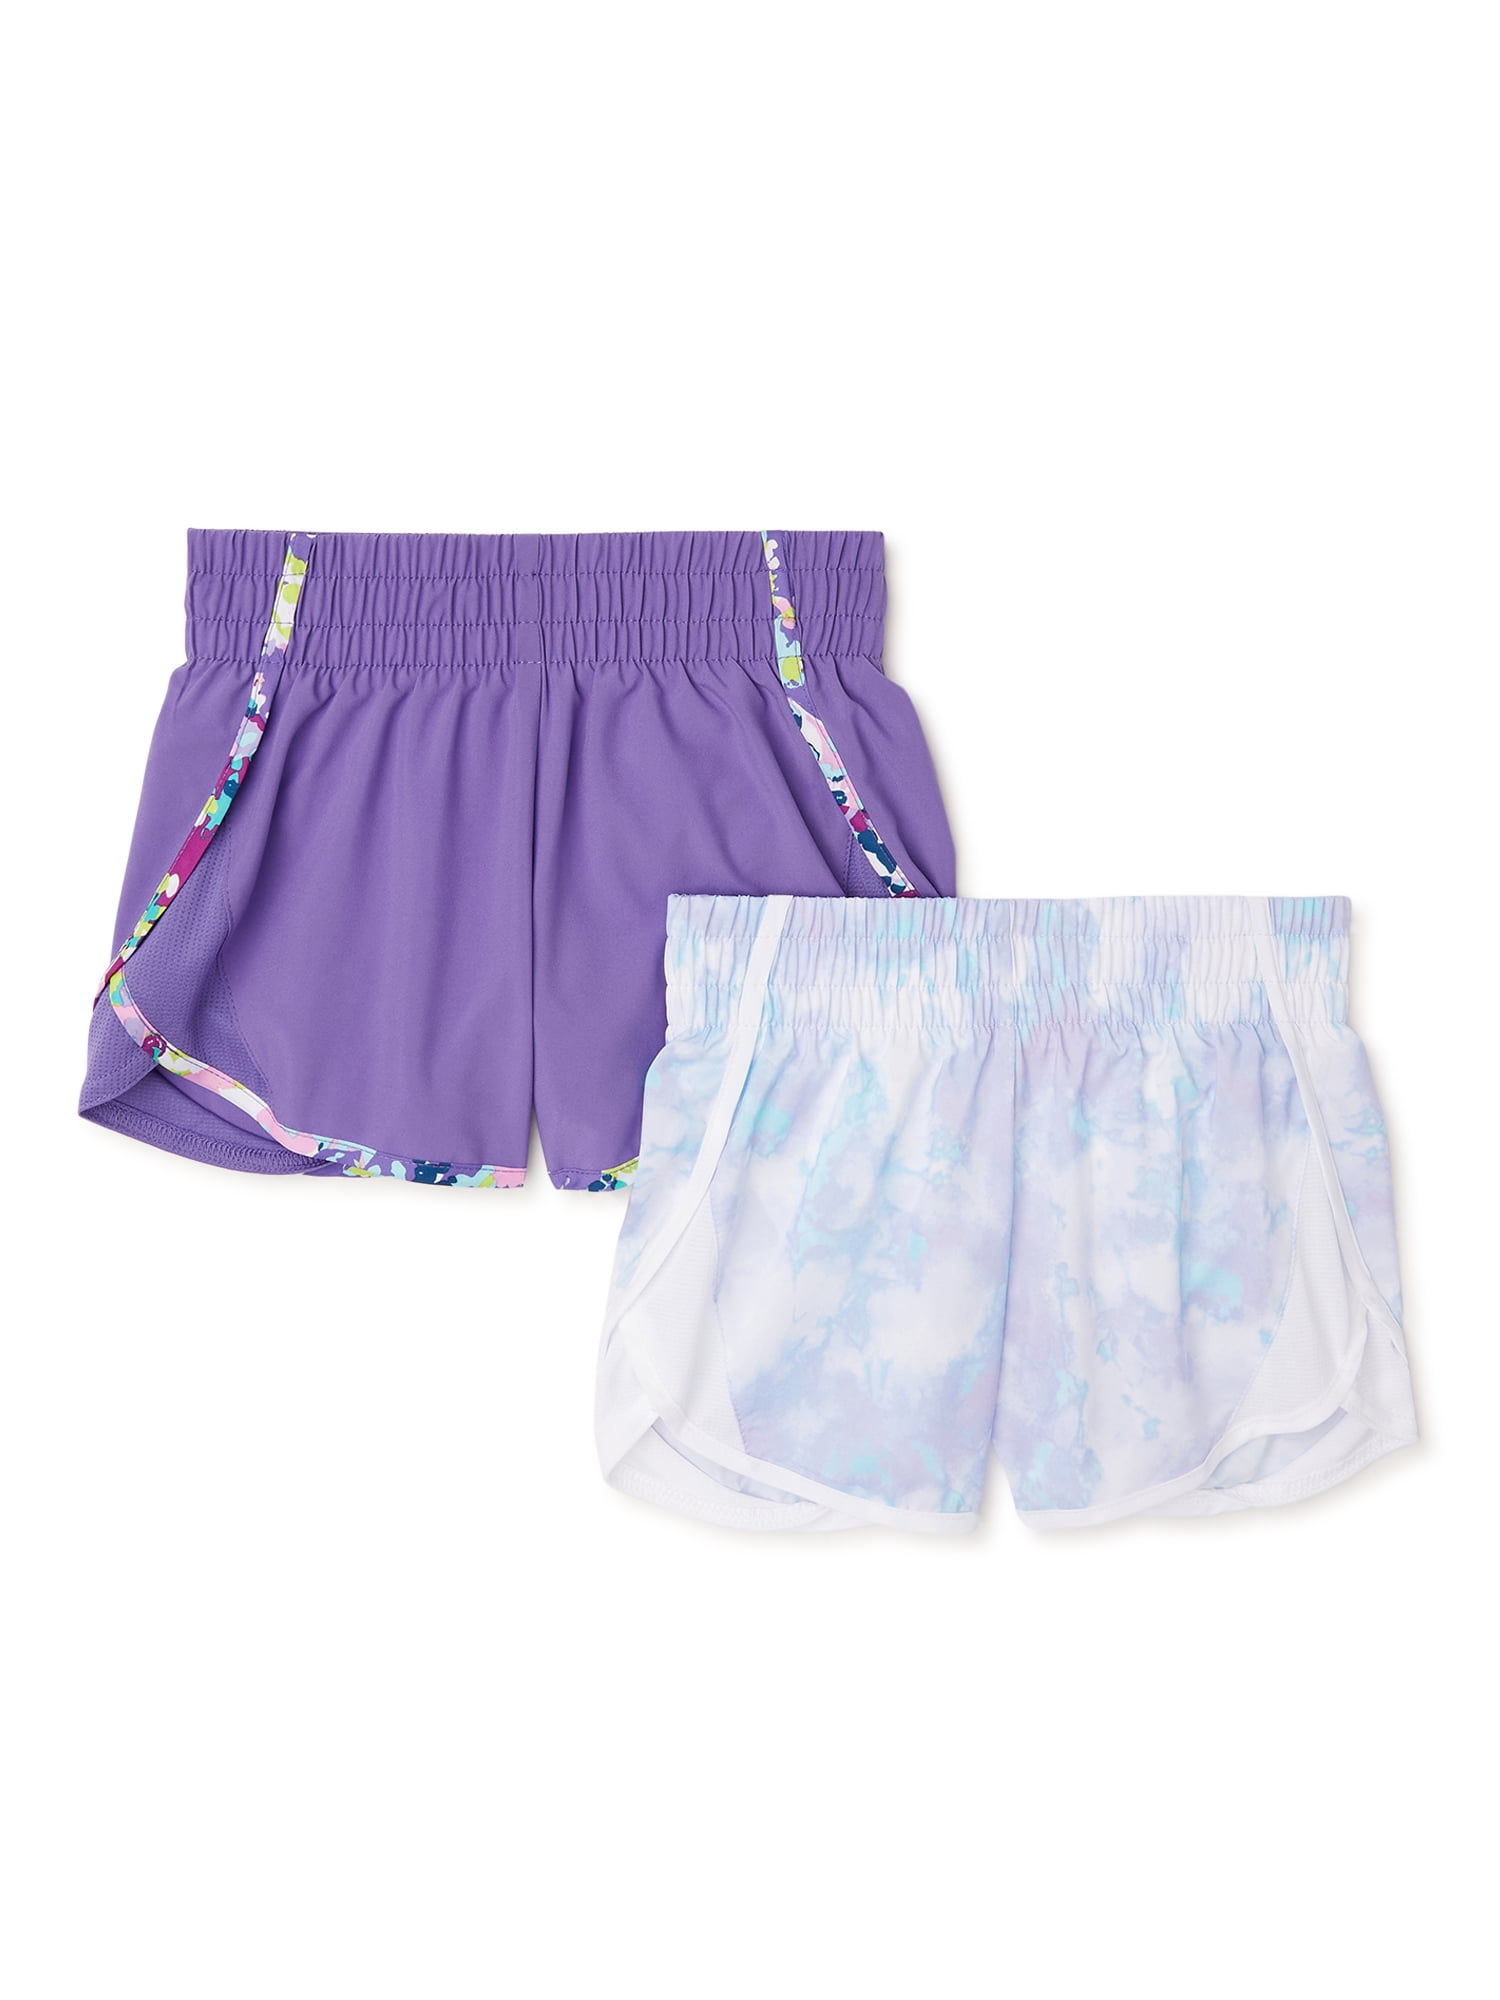 Athletic Works Girls' Printed and Solid Active Running Shorts, 2-Pack,  Sizes 4-18 & Plus - Walmart.com